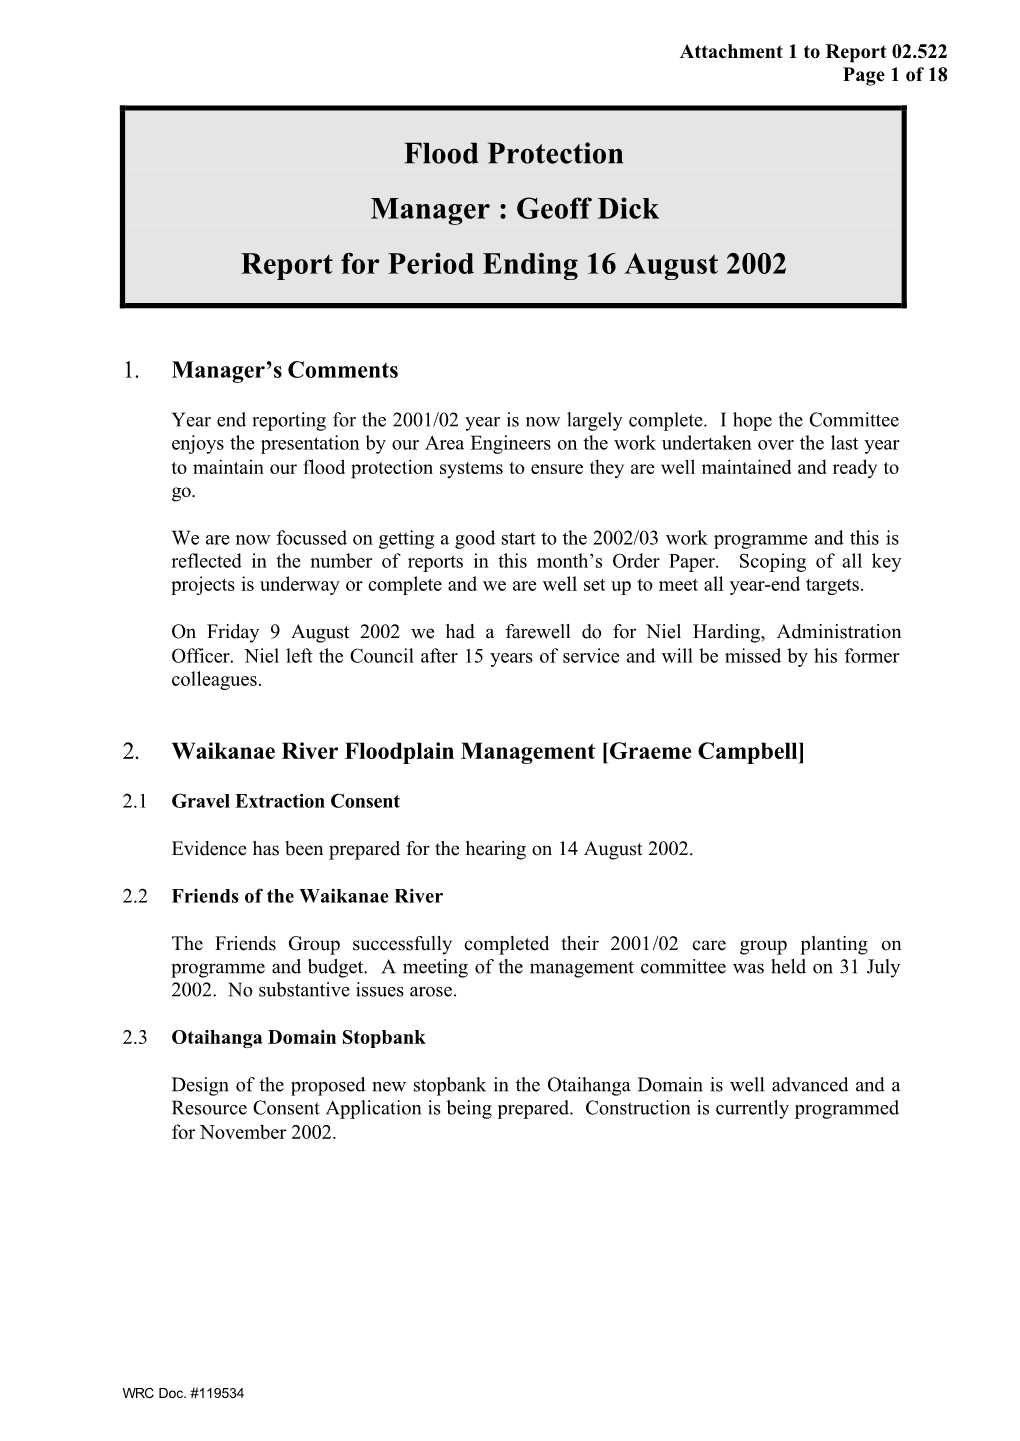 Flood Protection Manager : Geoff Dick Report for Period Ending 16 August 2002